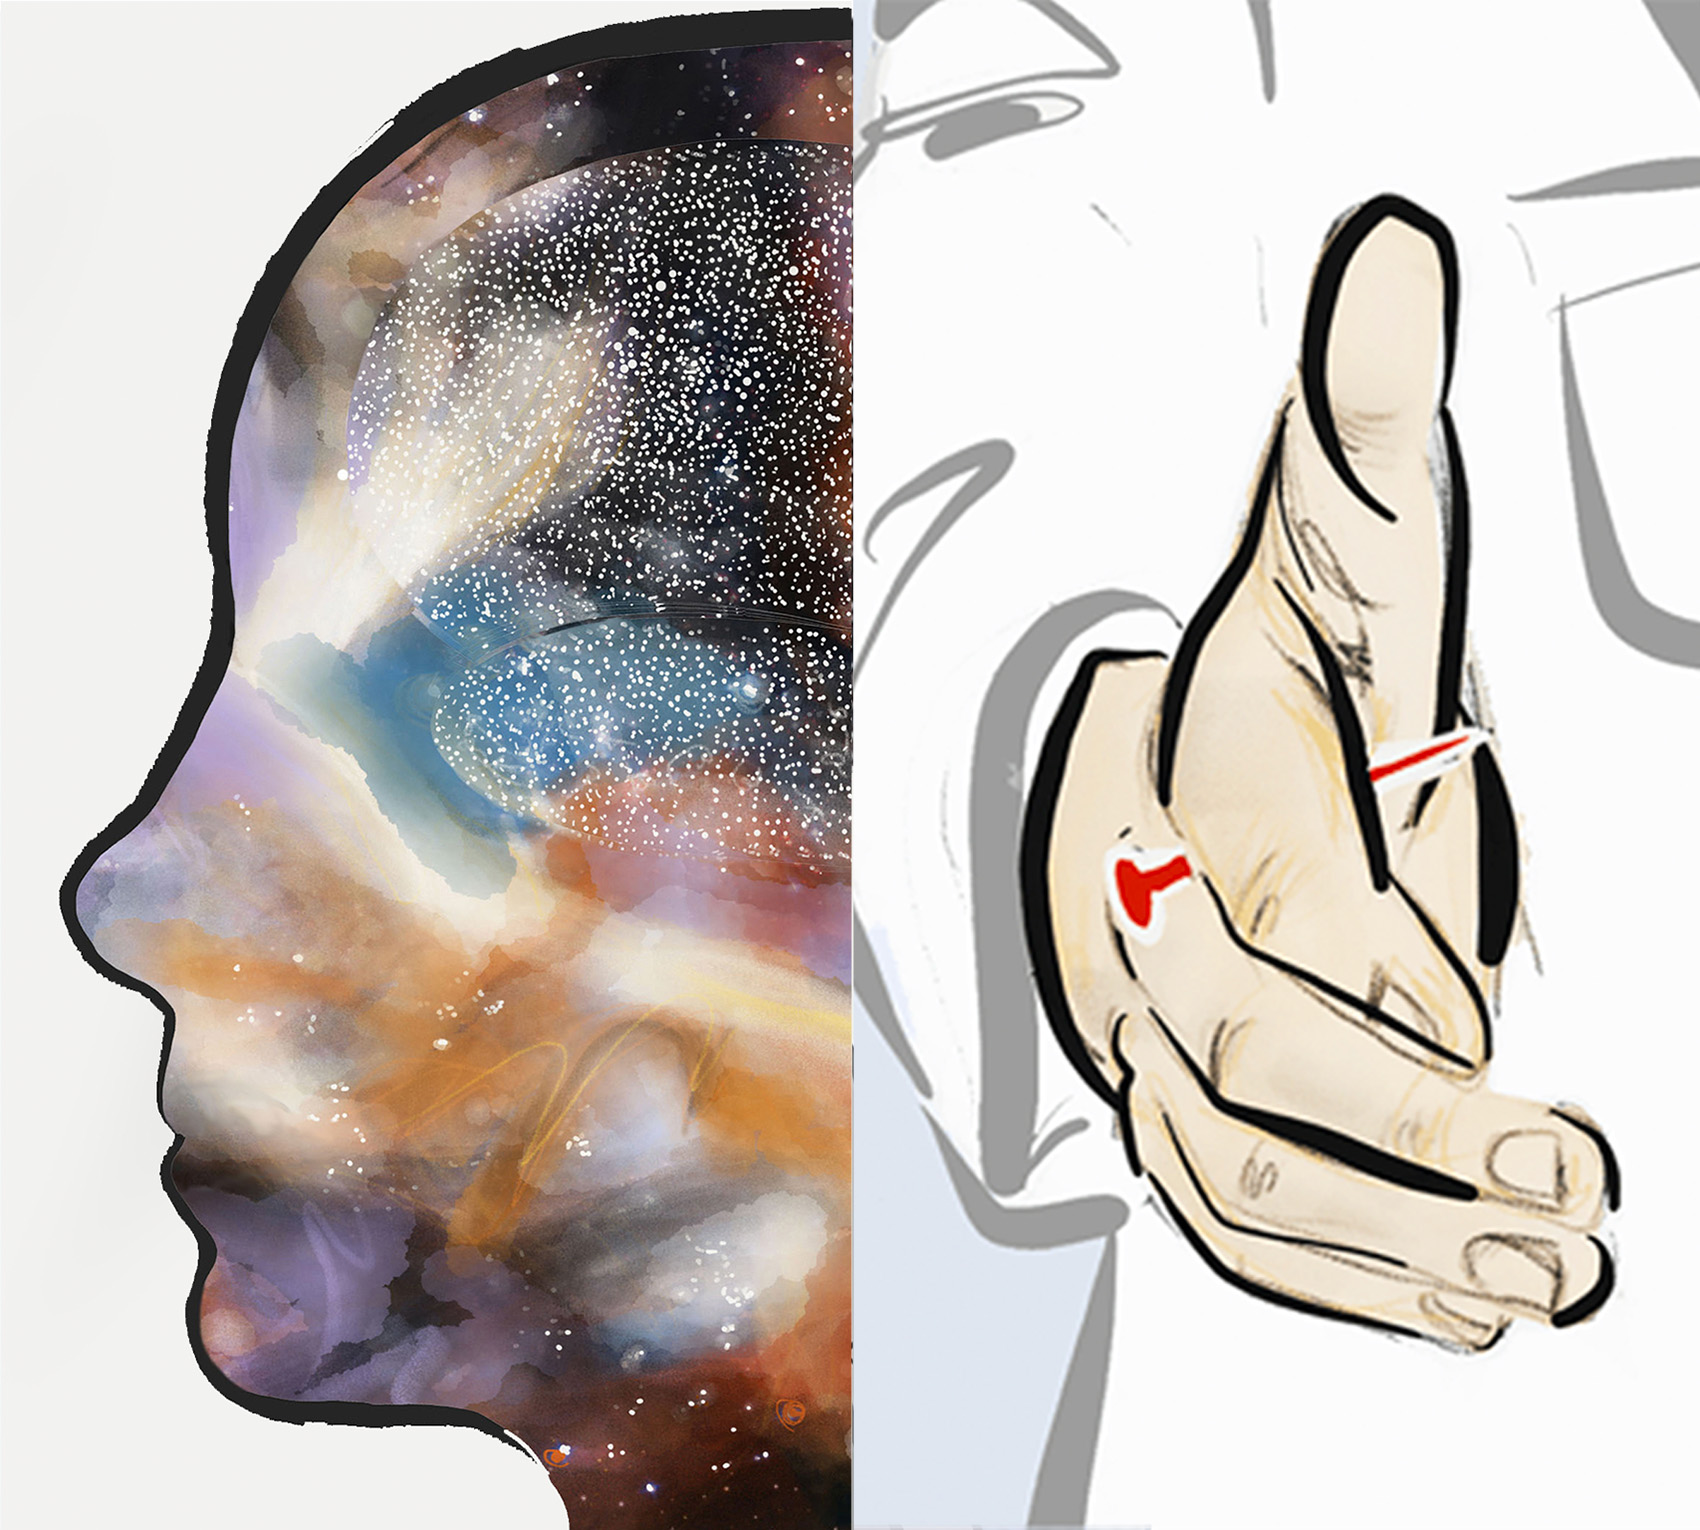 Composite image with a drawing of a head with a universe inside it on the left and a drawing of a outstretched hand hiding a needle on the right